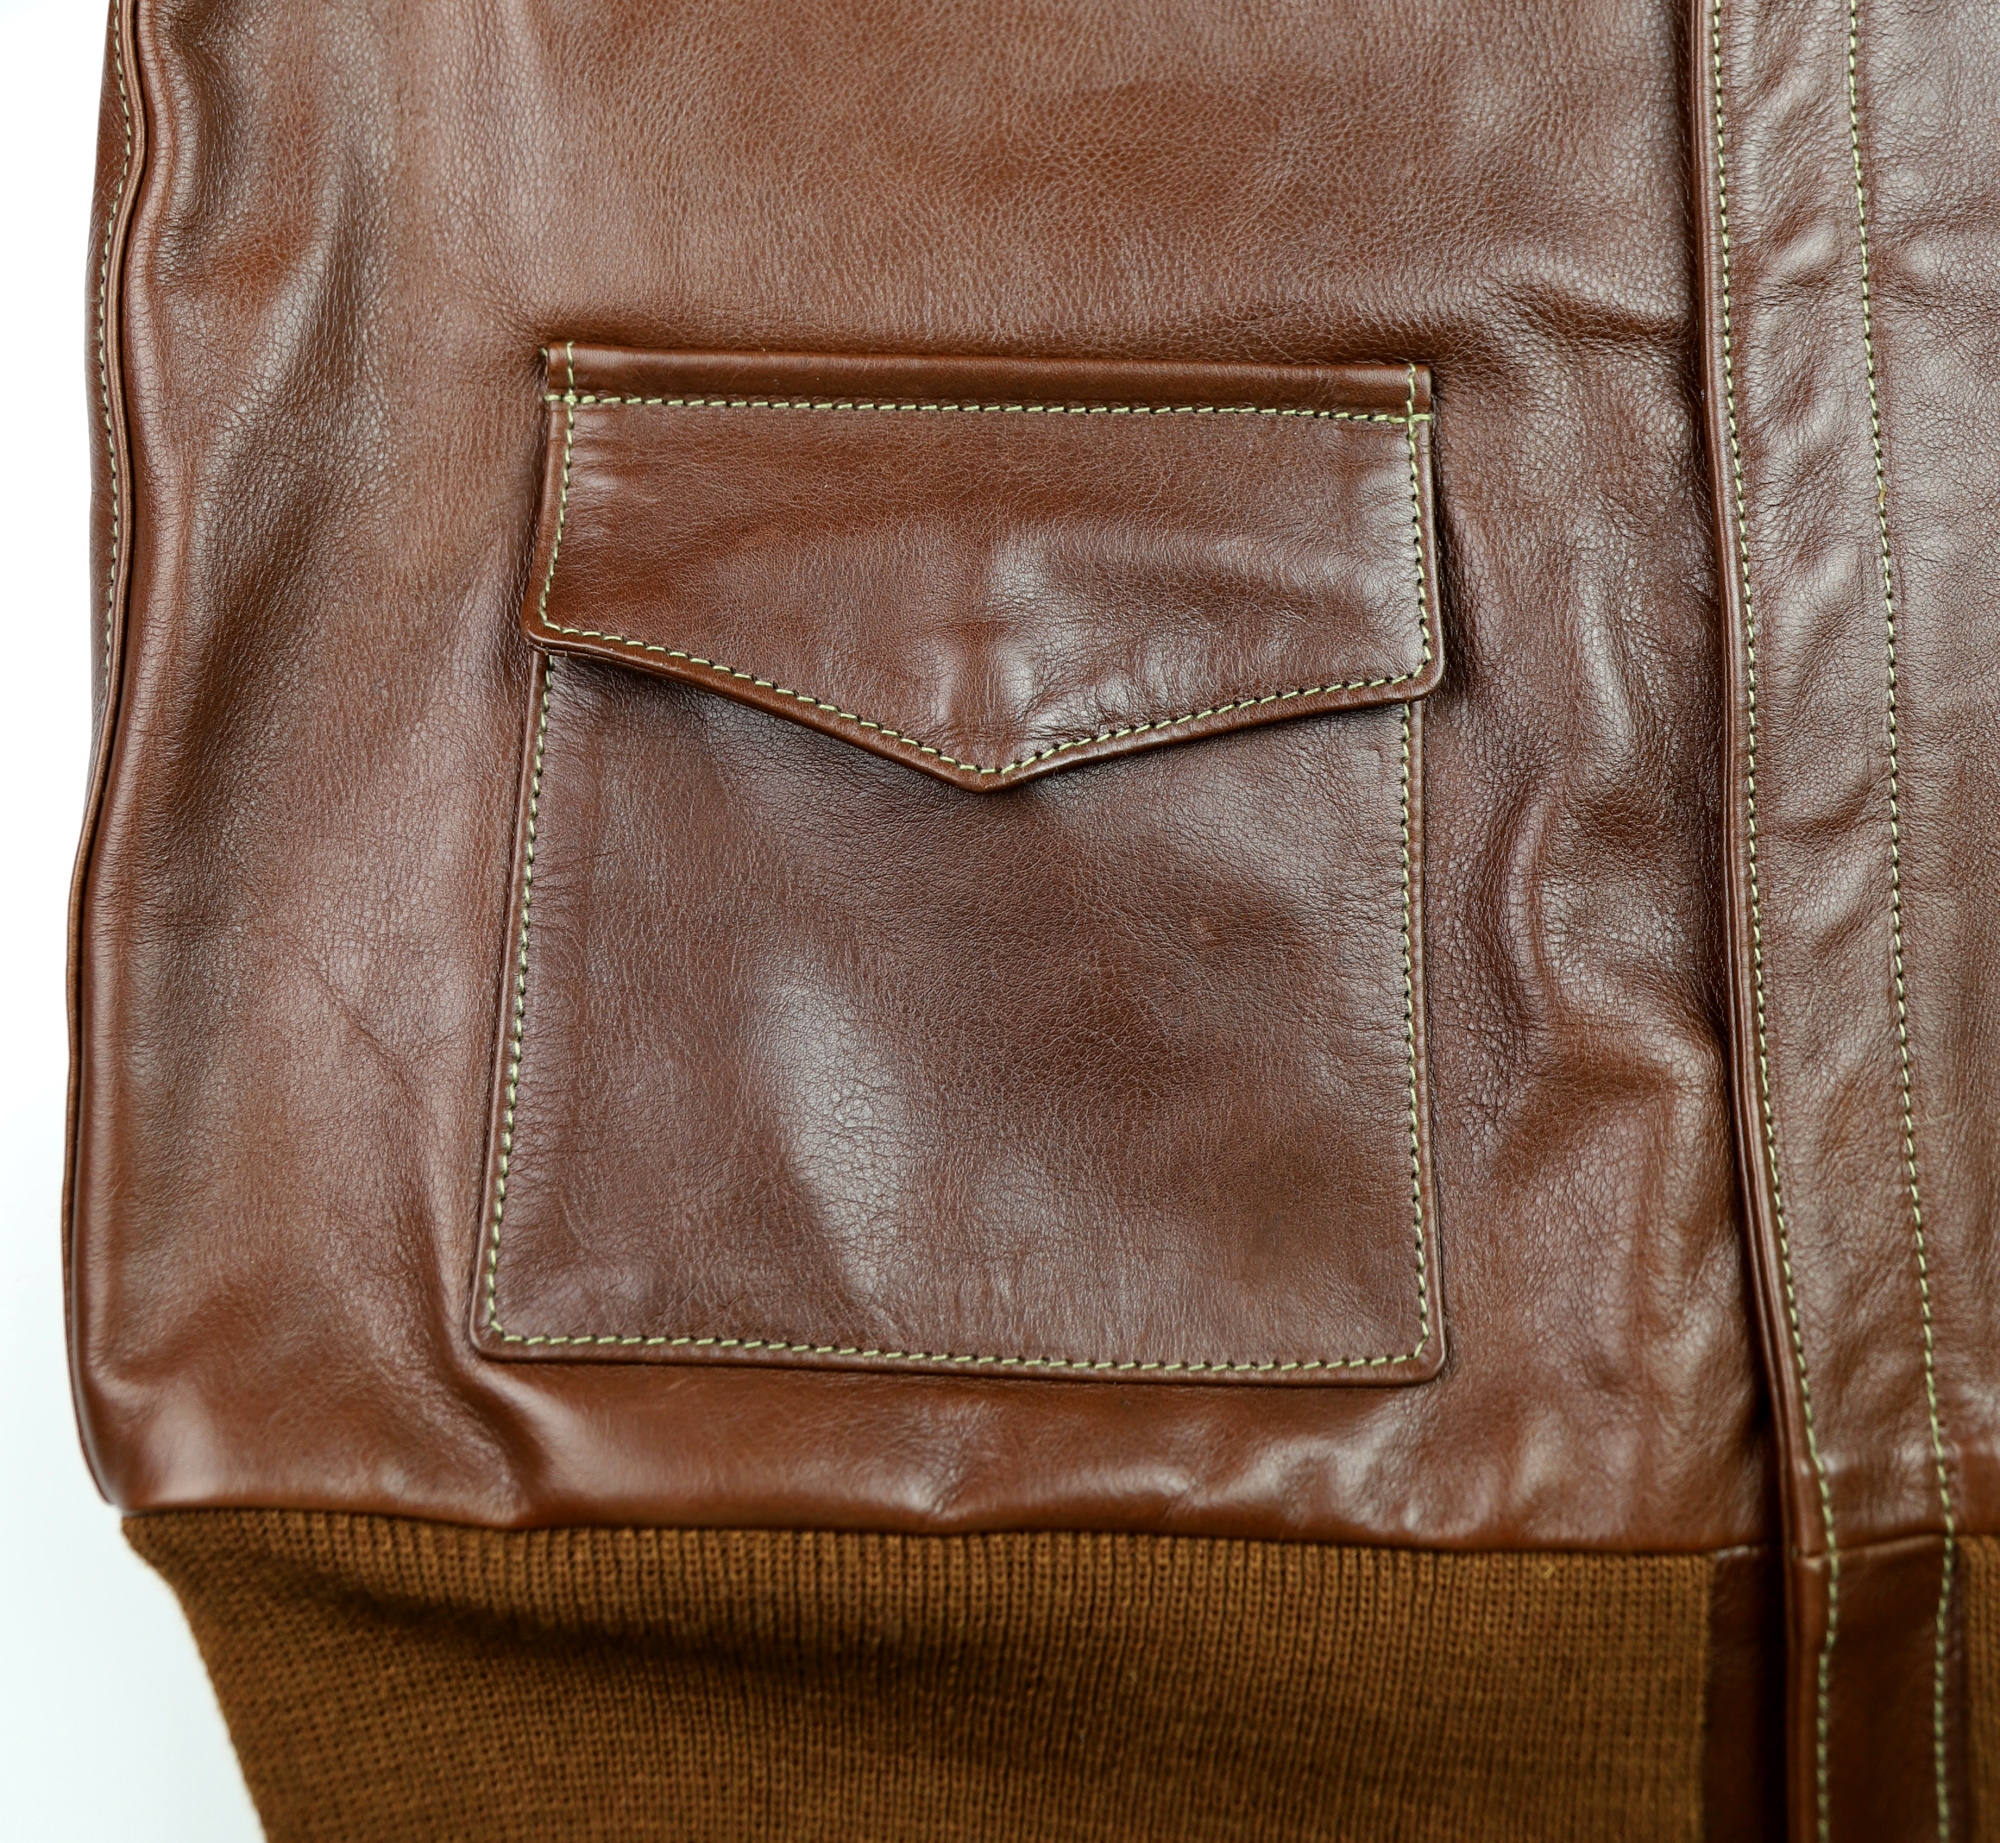 Aero A-2 18775 Russet Vicenza Horsehide SG3 patch pocket.jpg